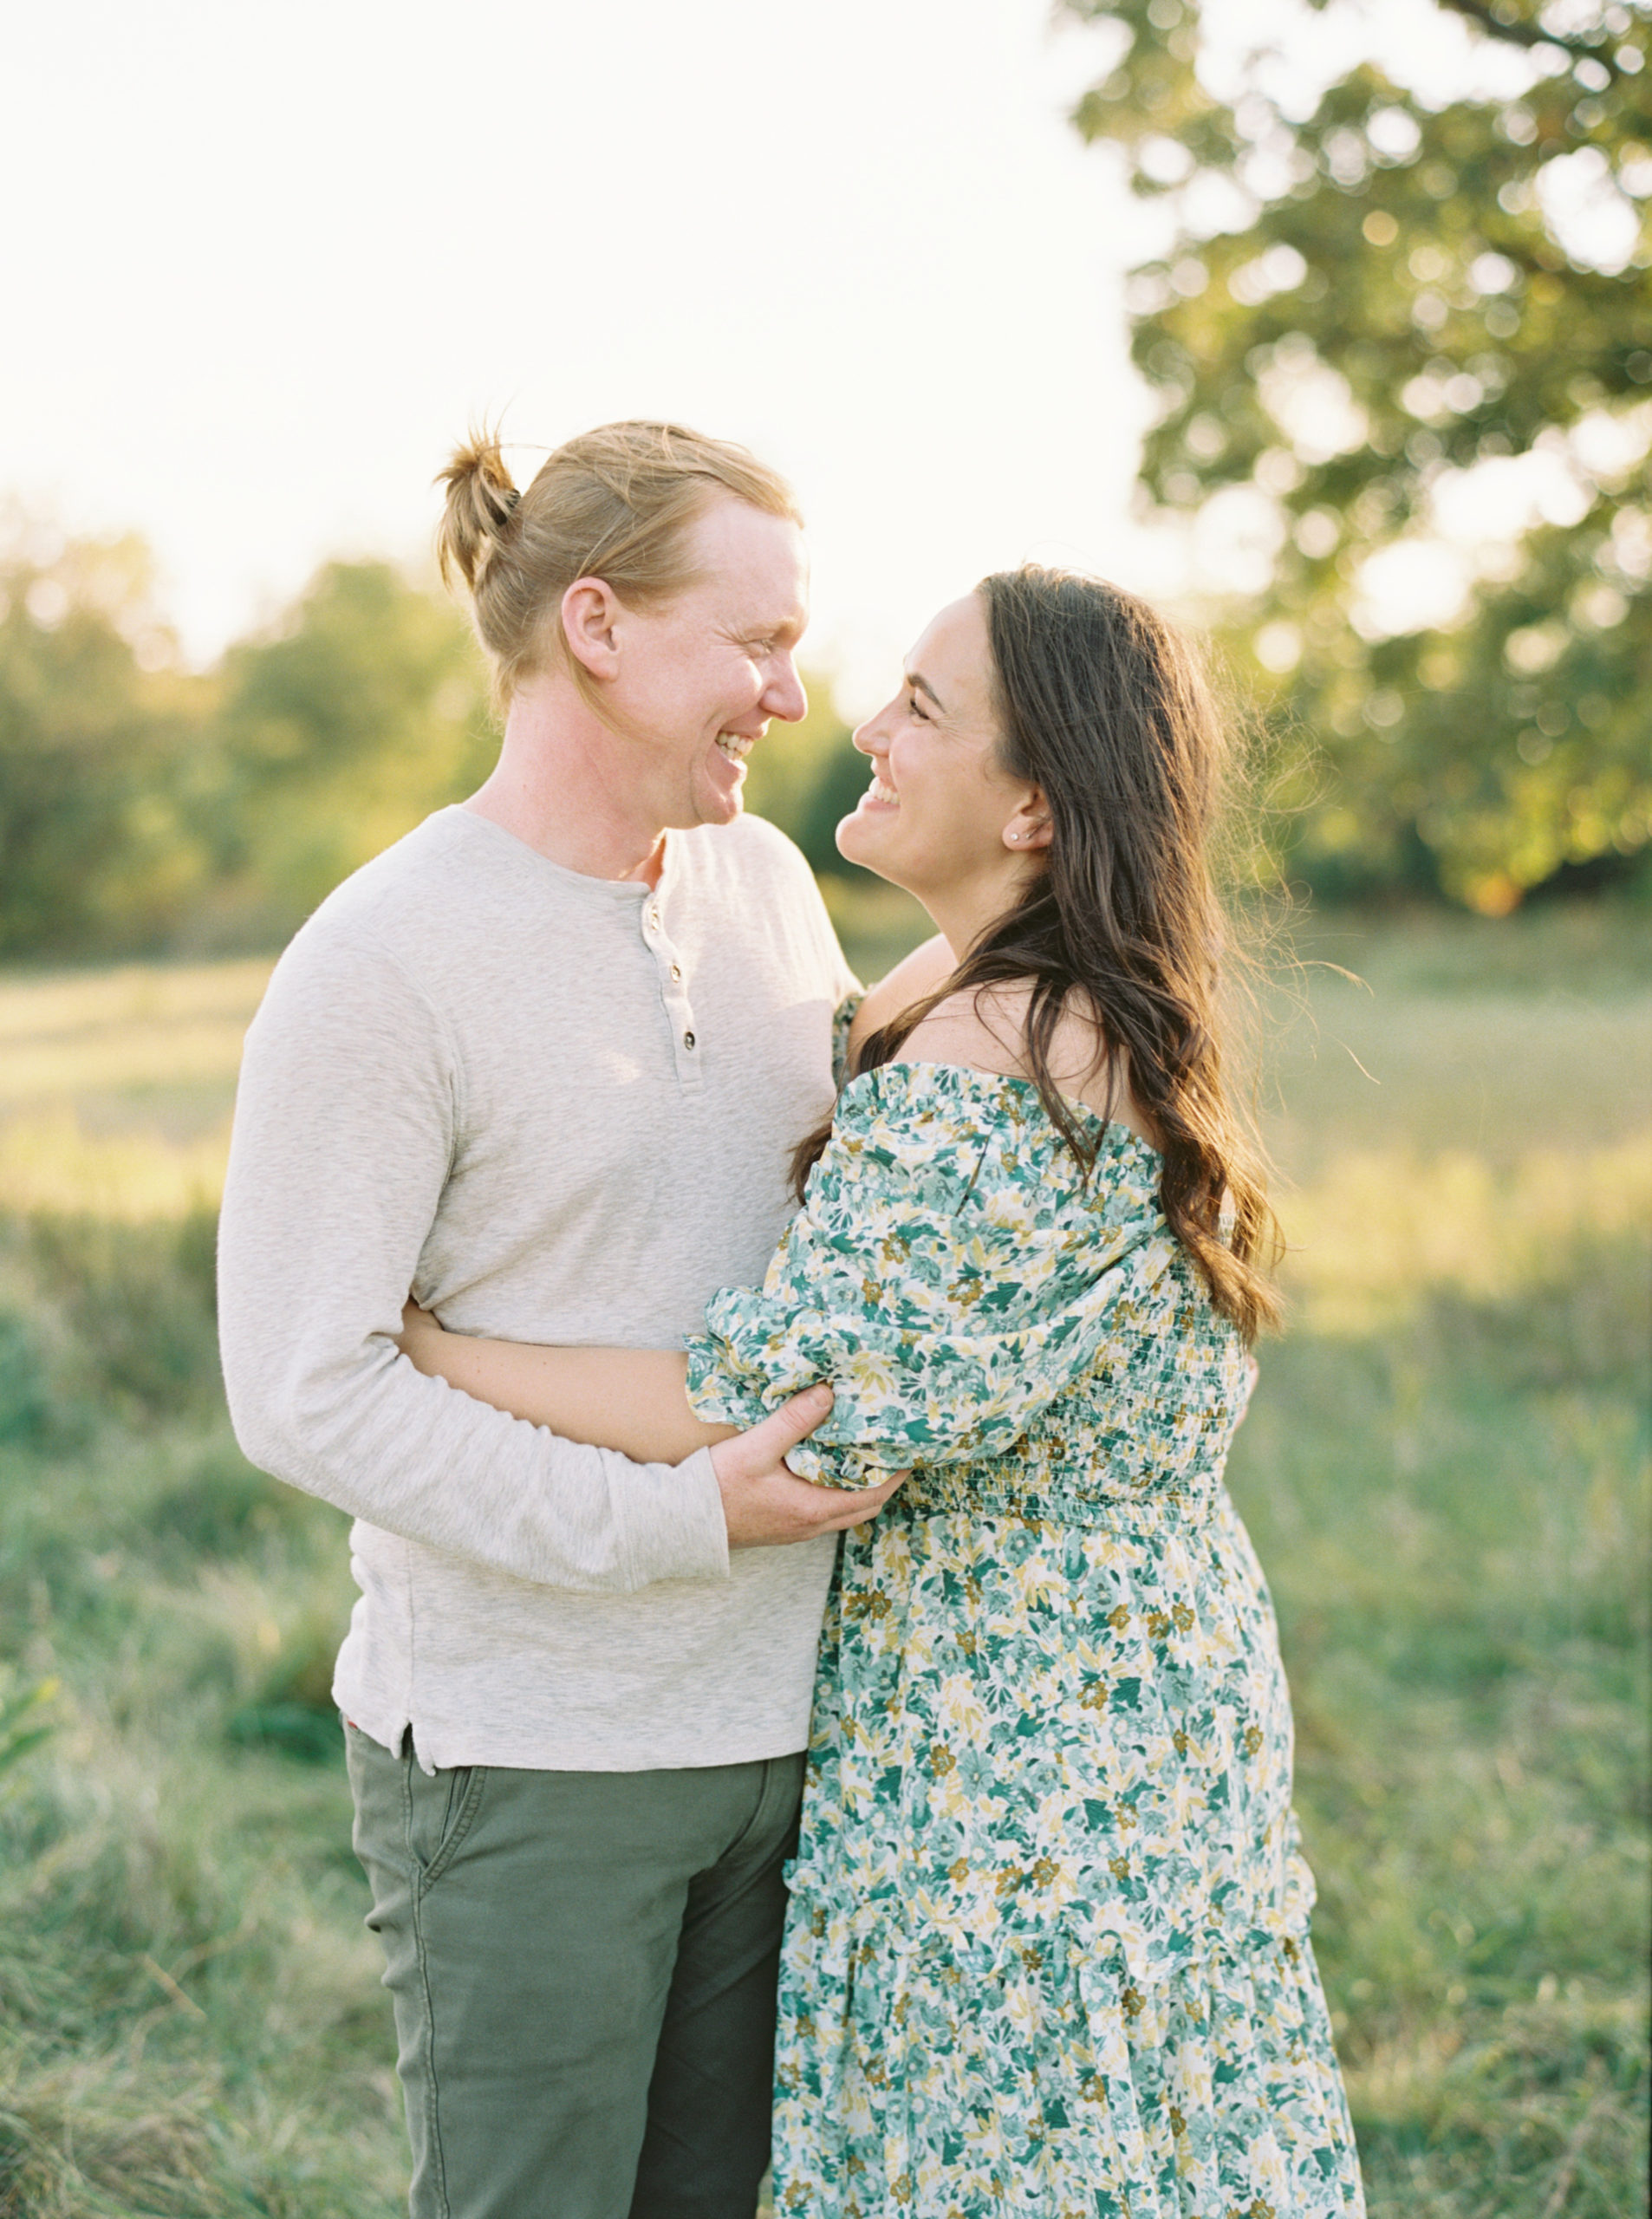 Husband and Wife cuddle in a grassy green field setting in Shorewood in the summer